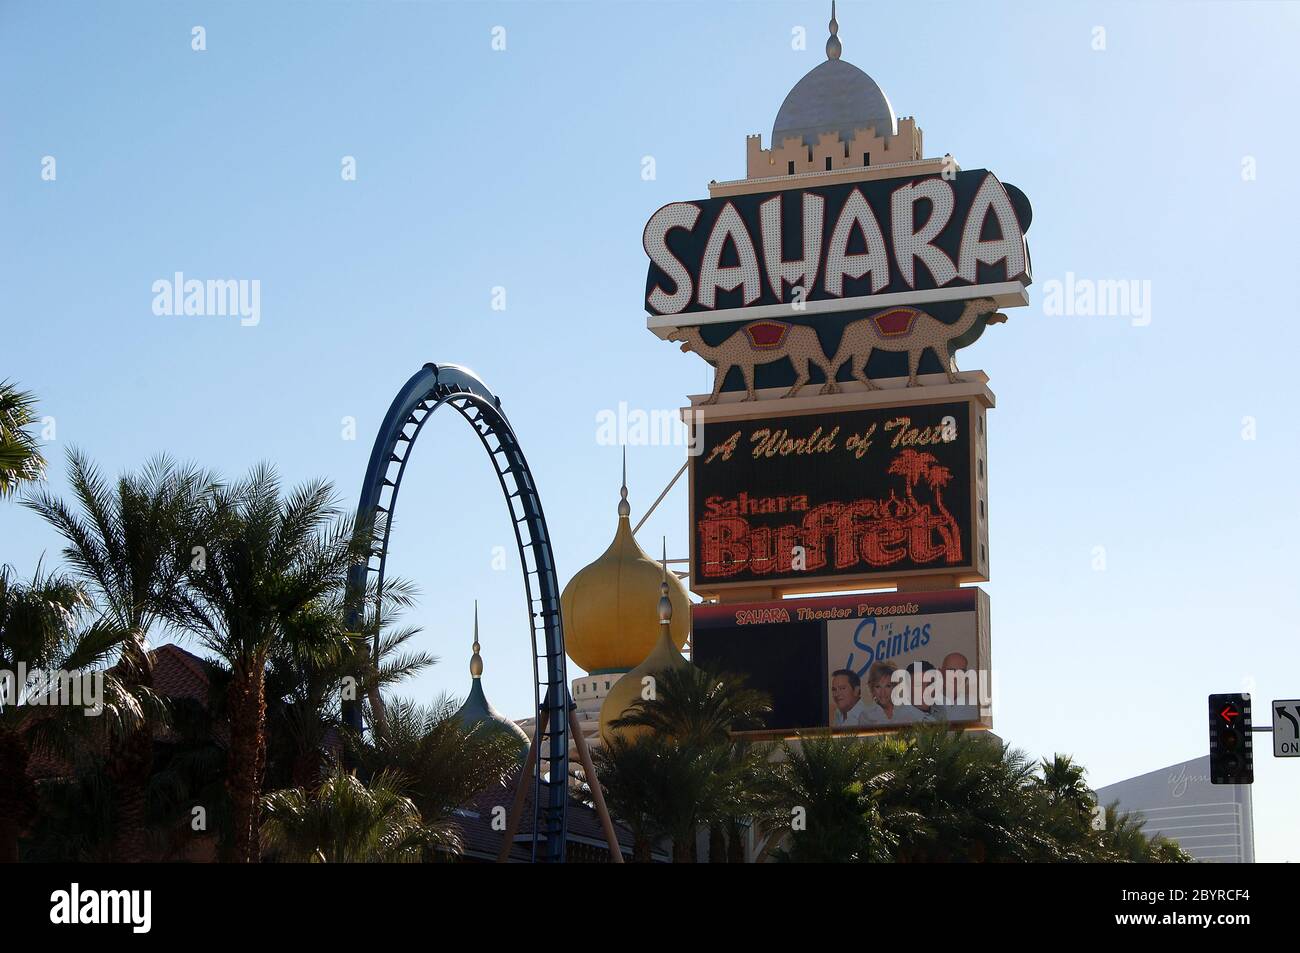 Sahara Hotel Las Vegas 478 Hotel and most important places in Las Vegas The most beautiful place in Las Vegas Stock Photo